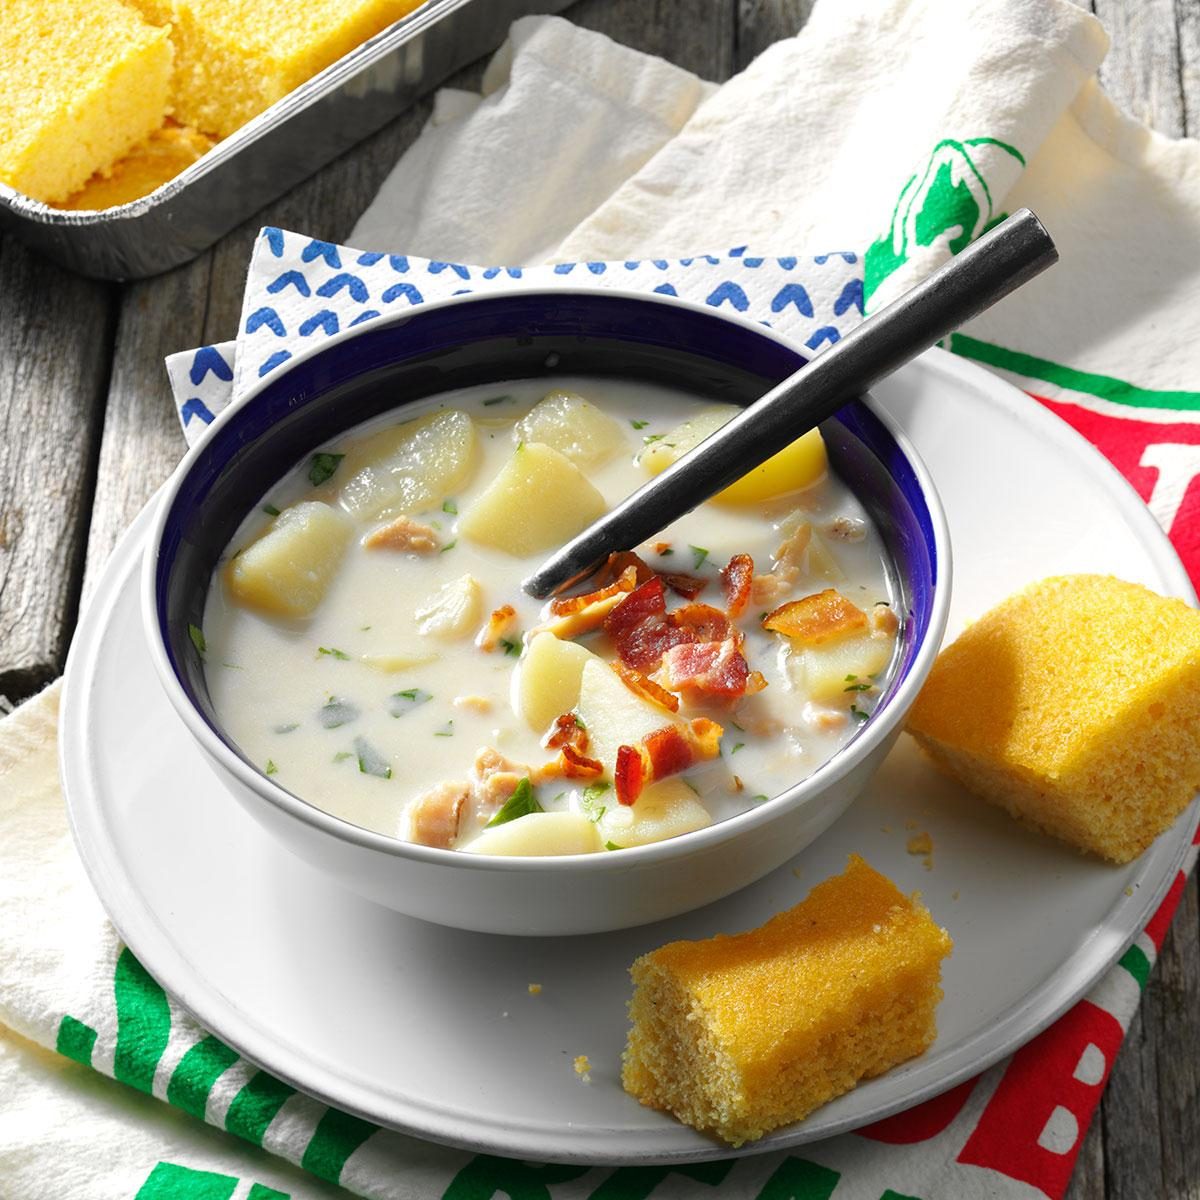 Inspired by: Red Lobster New England Clam Chowder